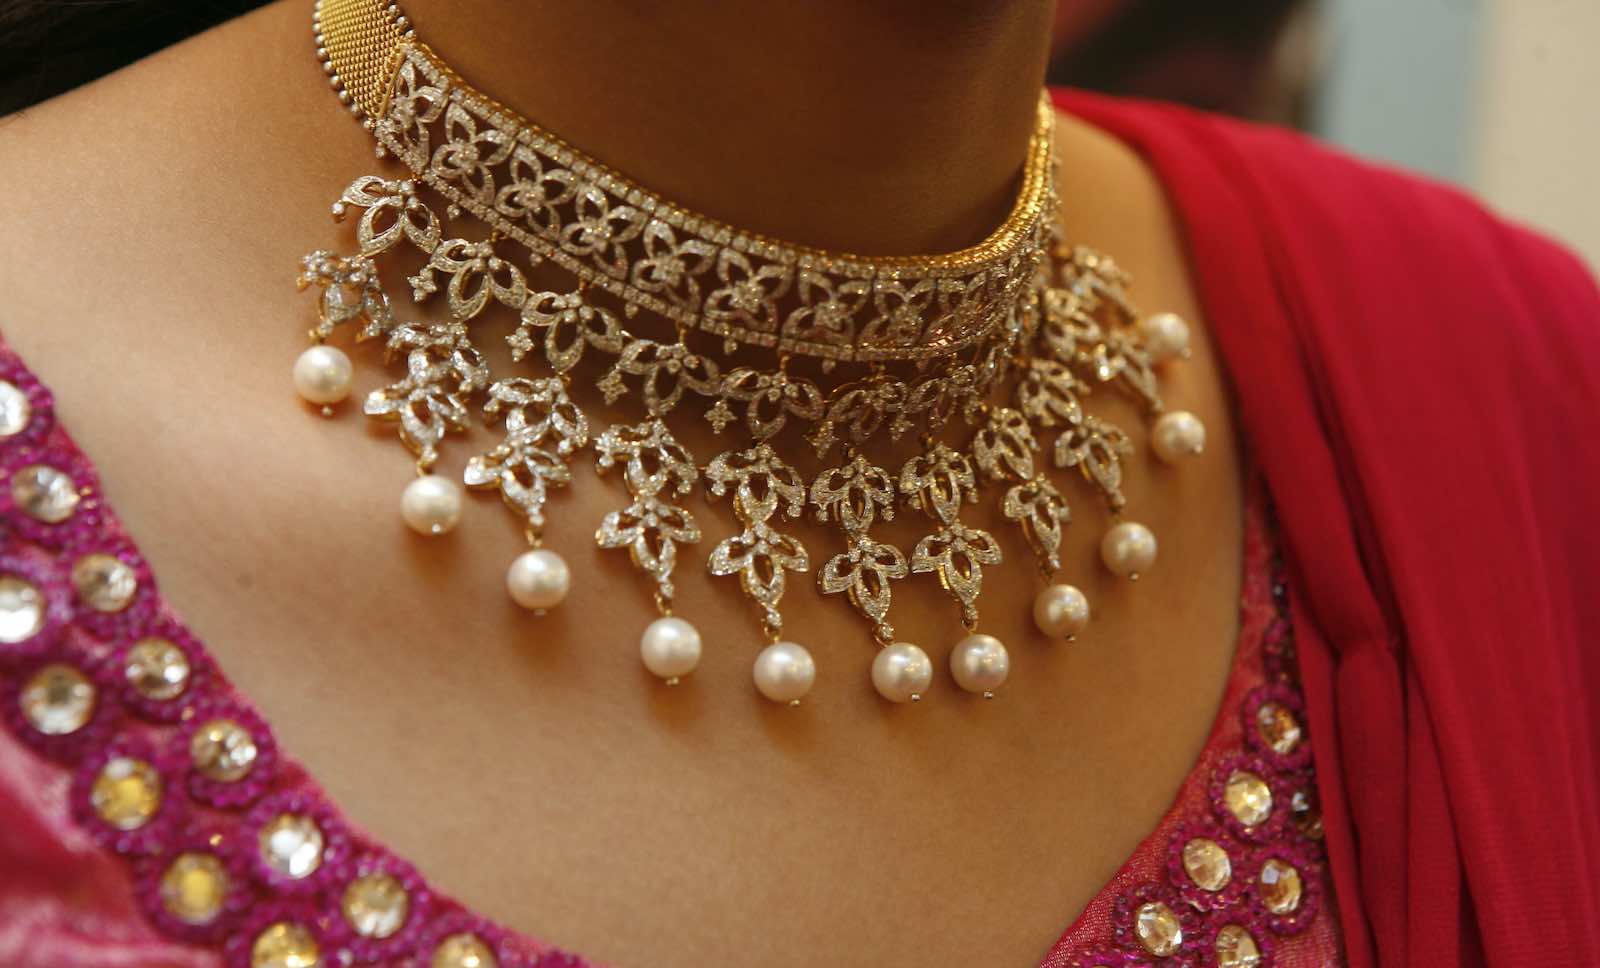 Tanishq is not the first brand to be attacked for hurting majoritarian Hindu sentiments in India (Vikram Sharma/The India Today Group via Getty Images)